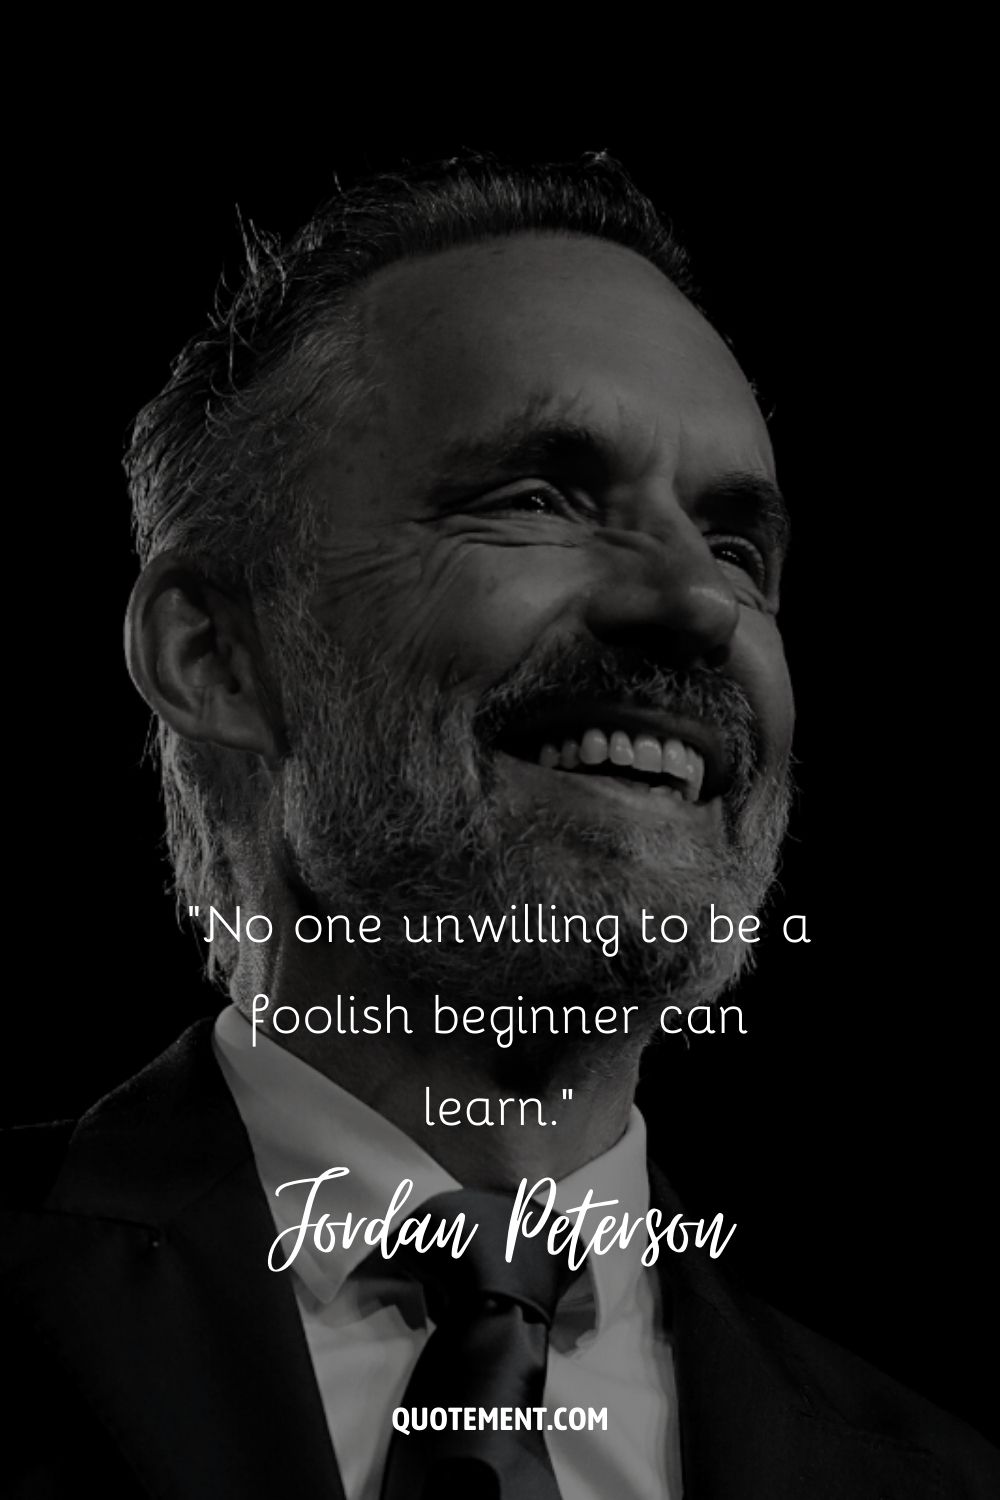 No one unwilling to be a foolish beginner can learn